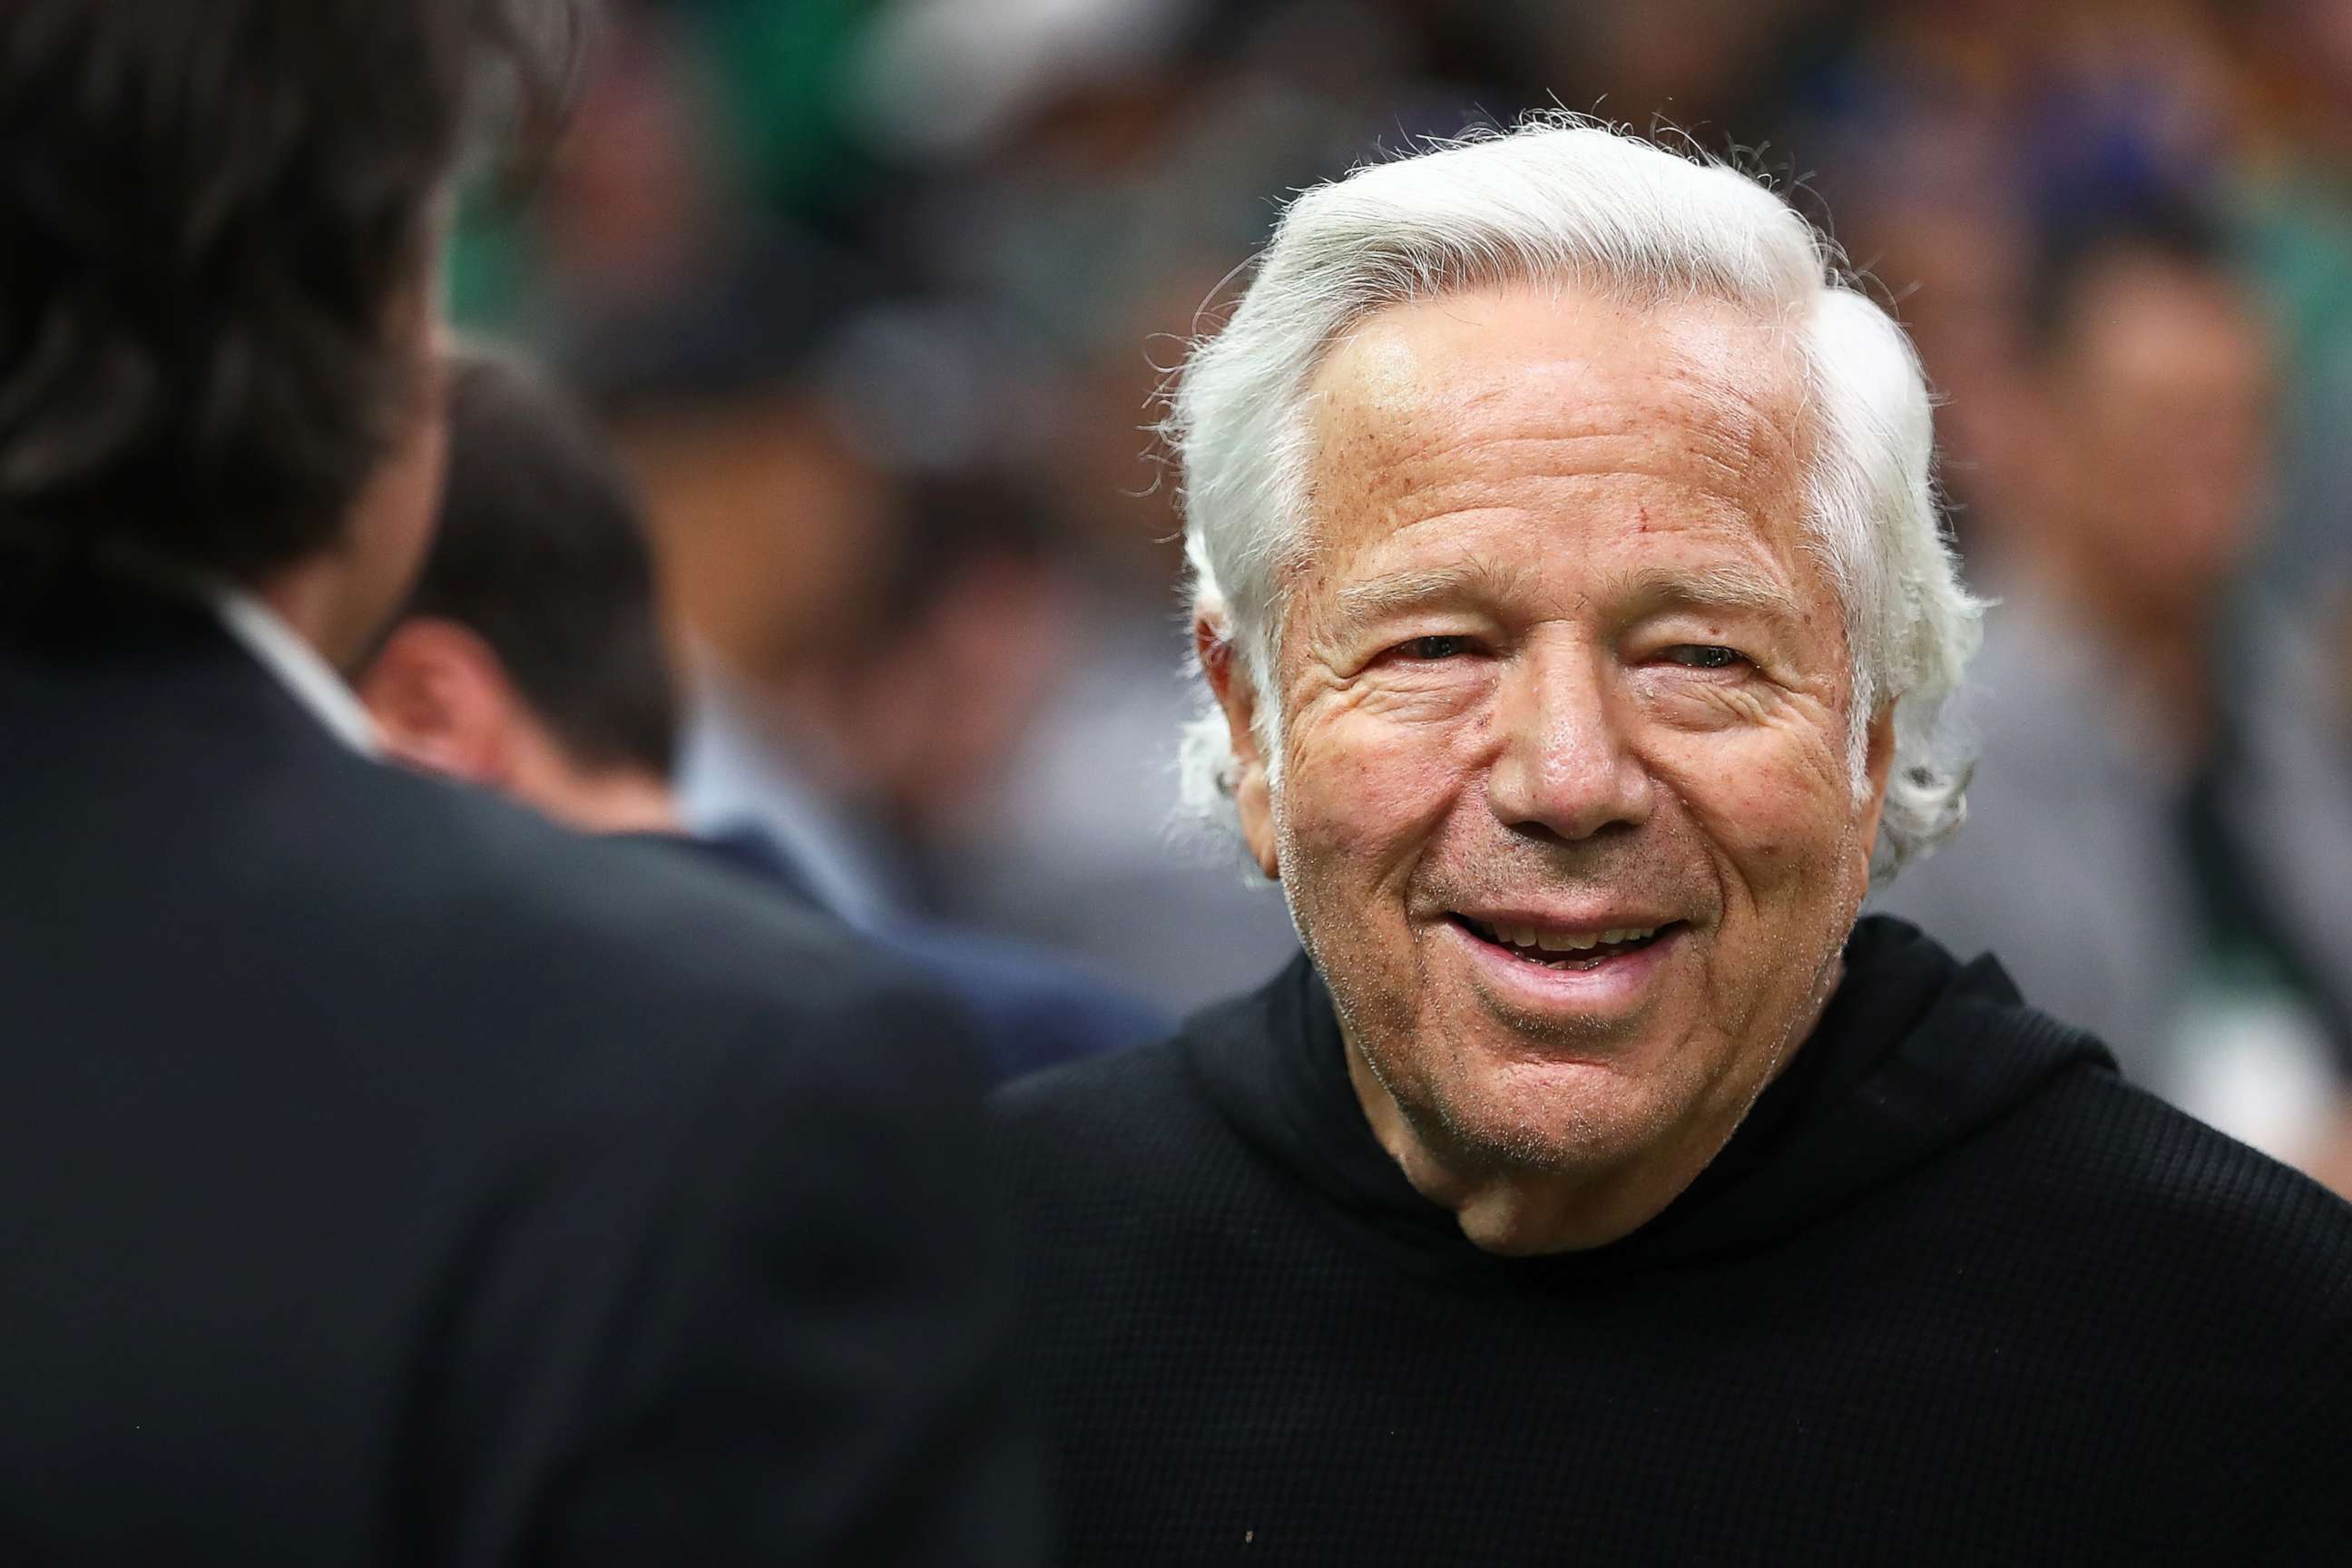 PHOTO: Robert Kraft, owner of the New England Patriots, is photographed before a game at TD Garden on Jan. 26, 2019 in Boston.